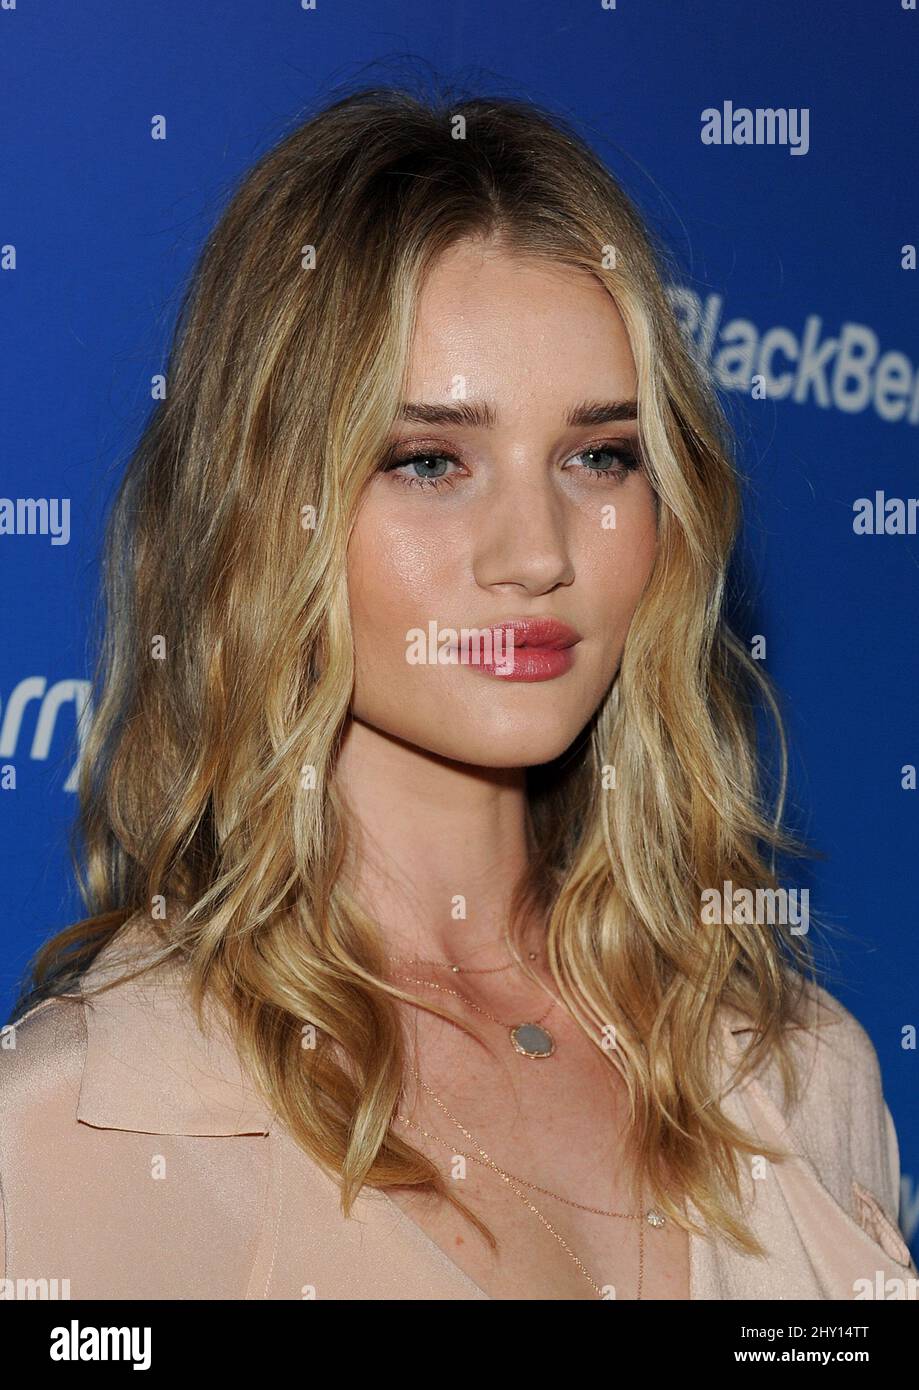 Rosie Huntington-Whiteley attending the Blackberry Z10 Launch Party held at Cecconi's in Hollywood, California. Stock Photo